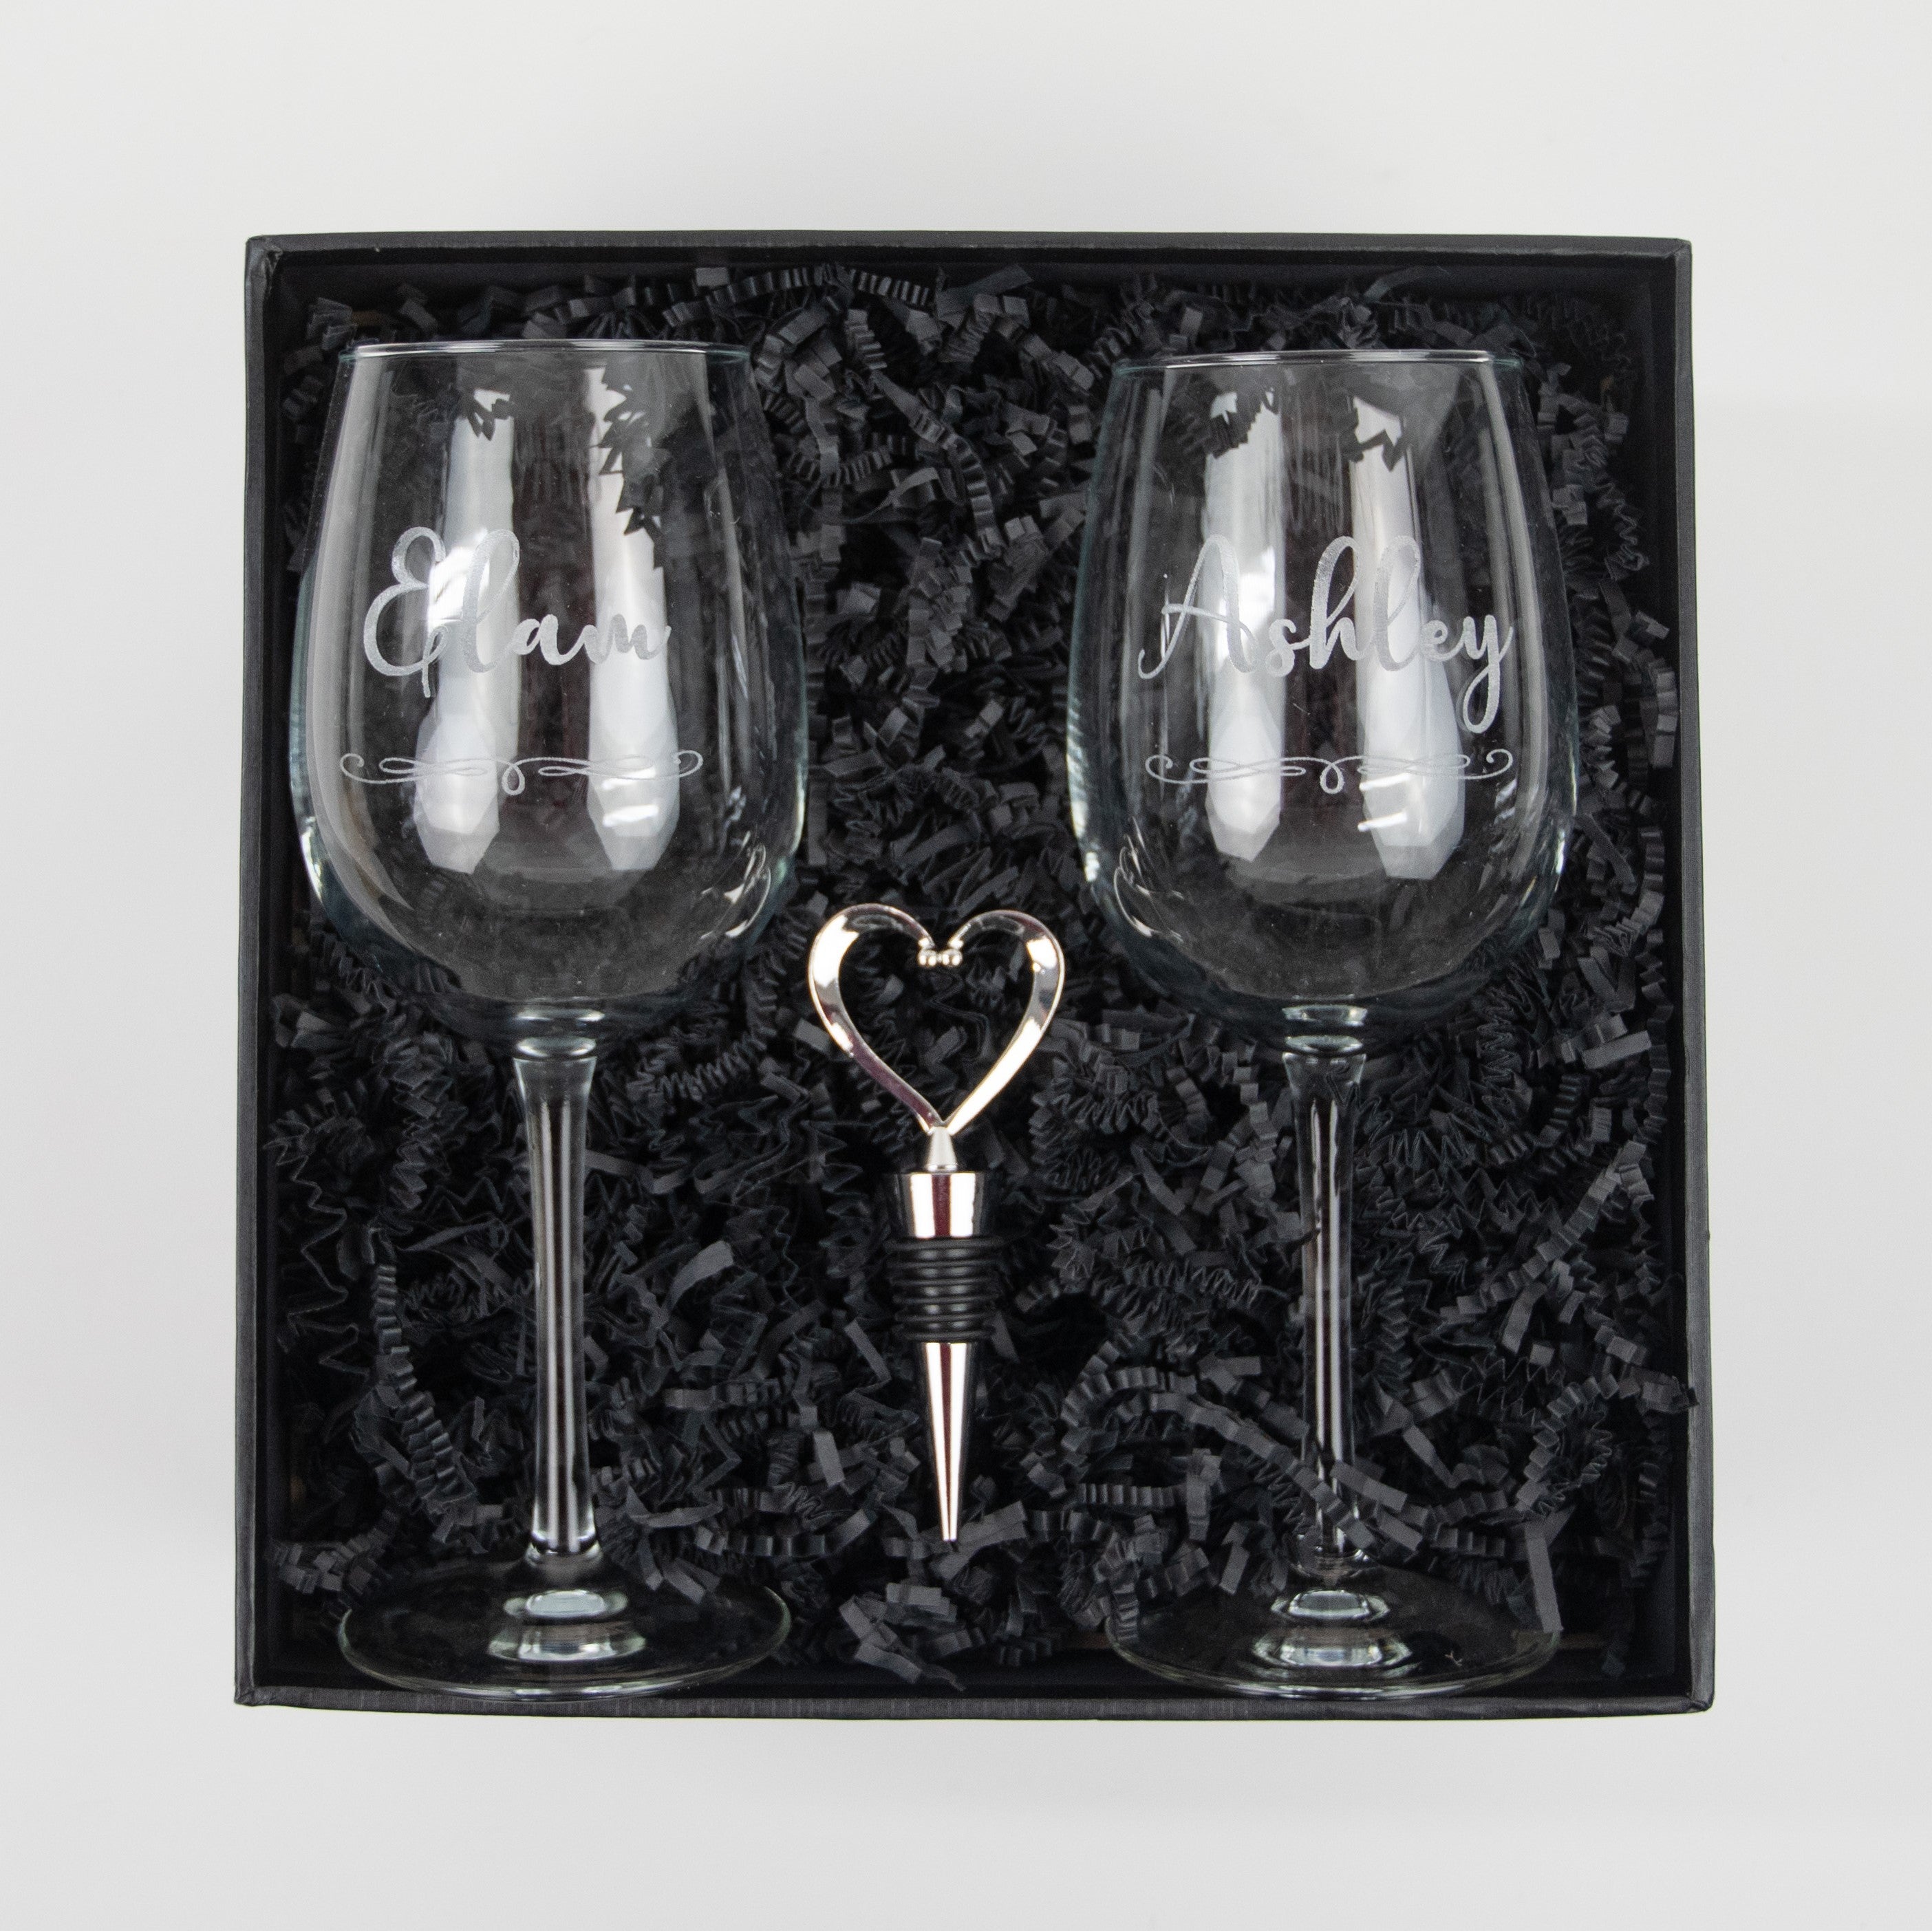 Cute DIY Valentine's Day Gift - Personalized Wine Glasses - Project